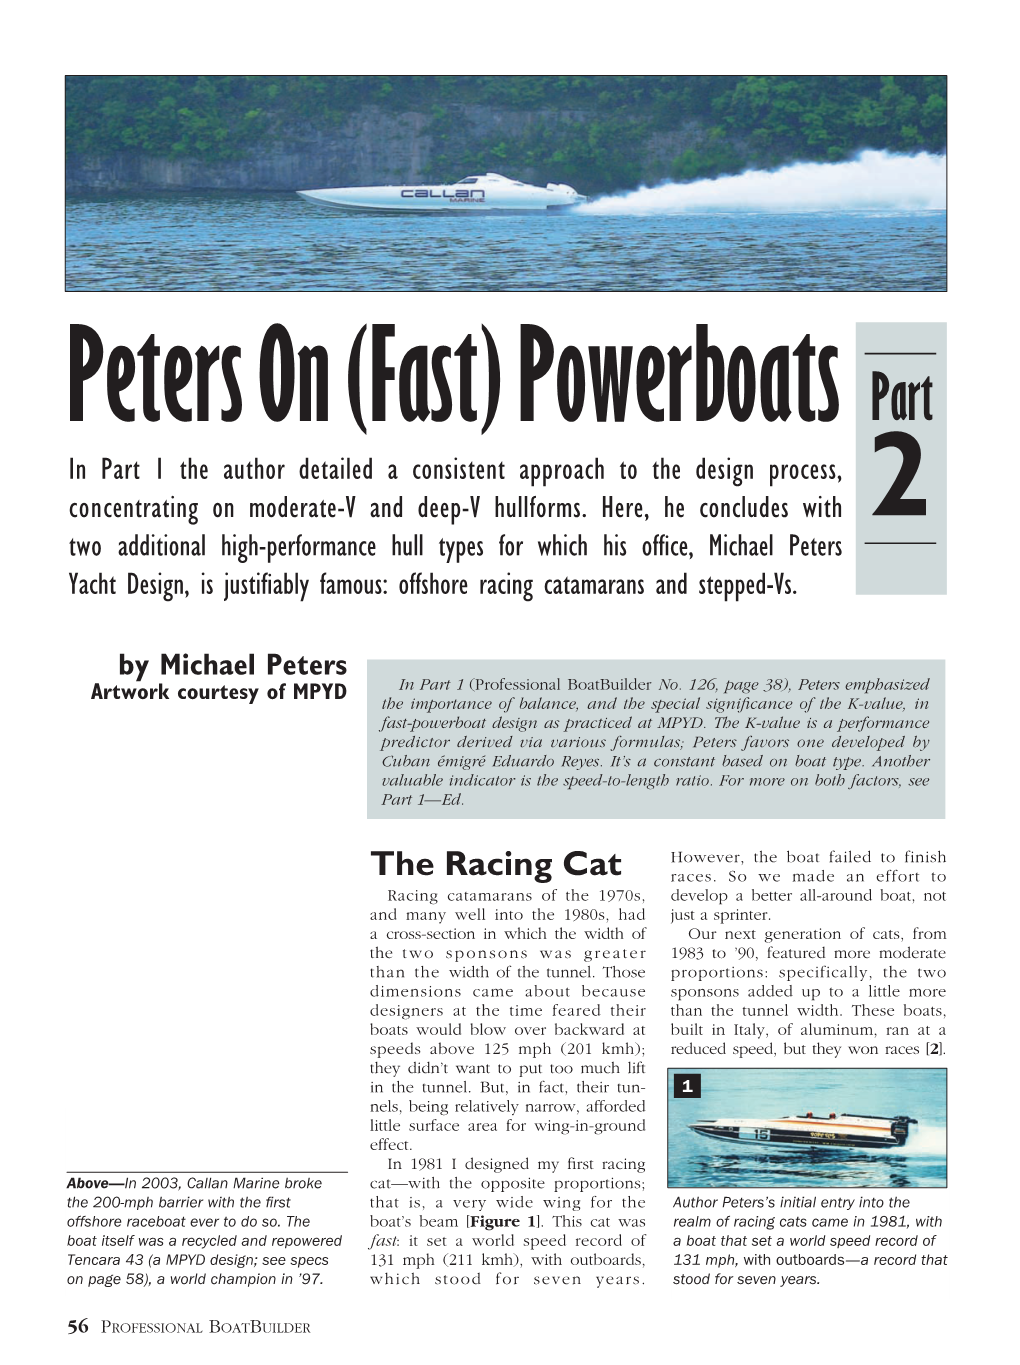 Peters on (Fast) Powerboats Part in Part 1 the Author Detailed a Consistent Approach to the Design Process, Concentrating on Moderate-V and Deep-V Hullforms